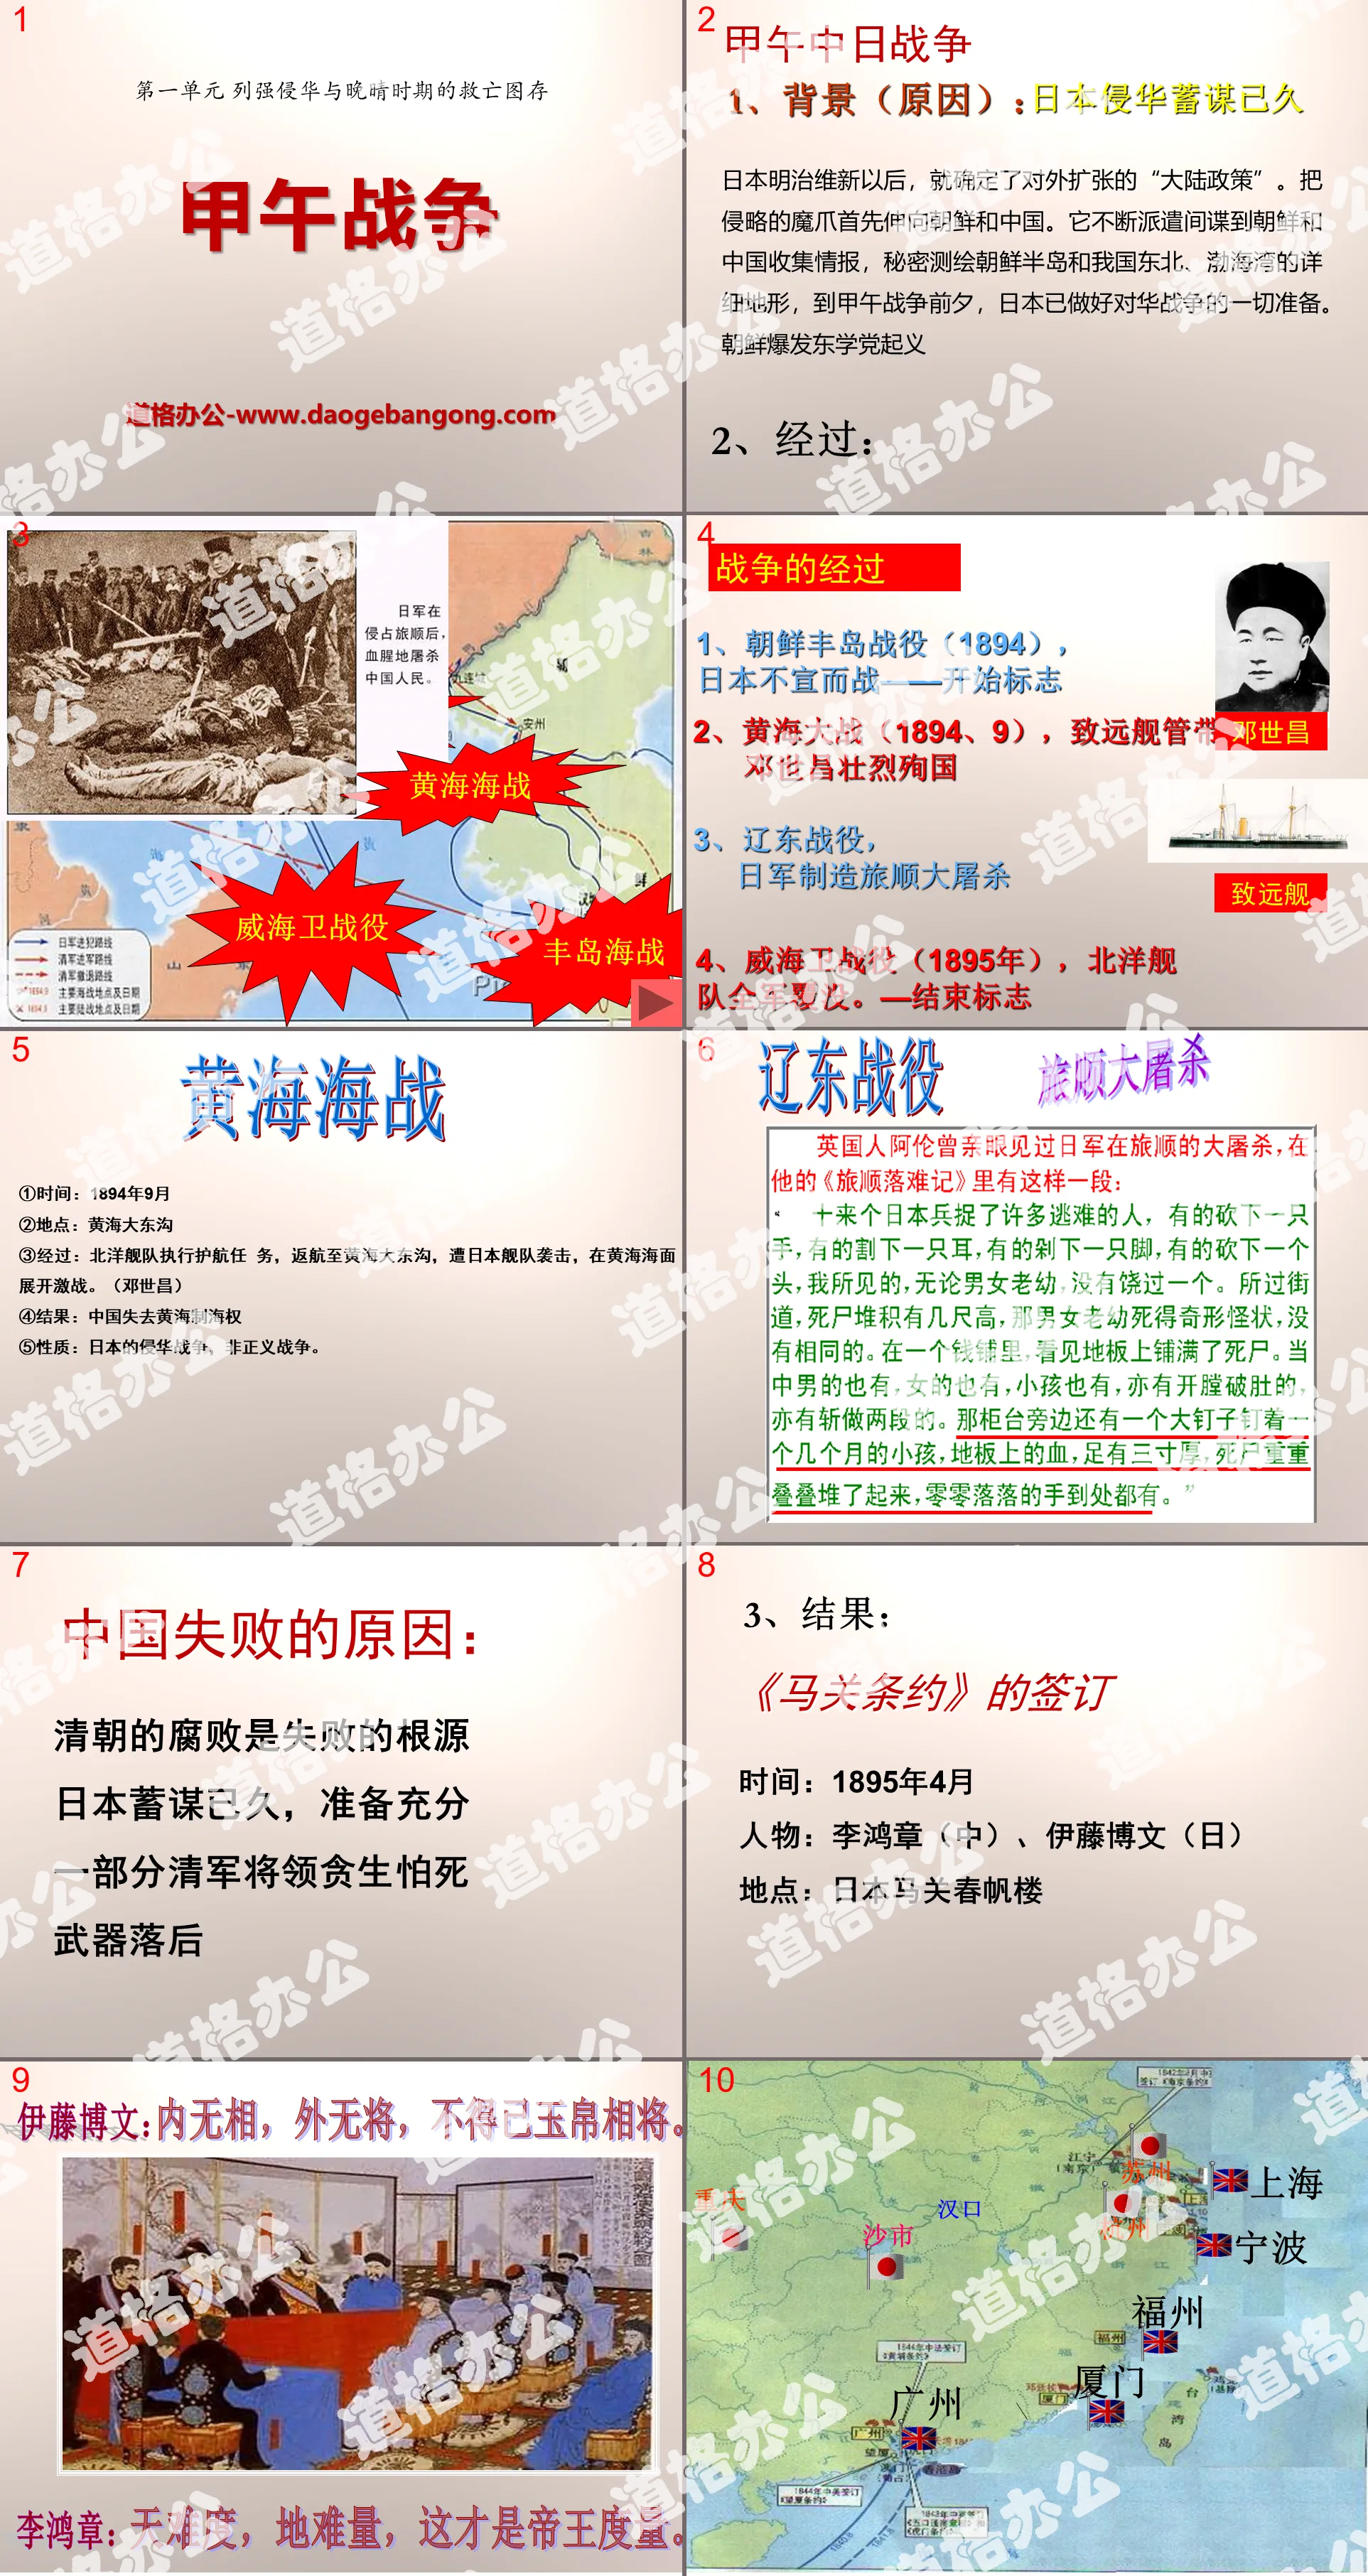 "The Sino-Japanese War of 1894", the invasion of China by foreign powers and the preservation of national salvation plans during the Wanqing Period PPT courseware 3